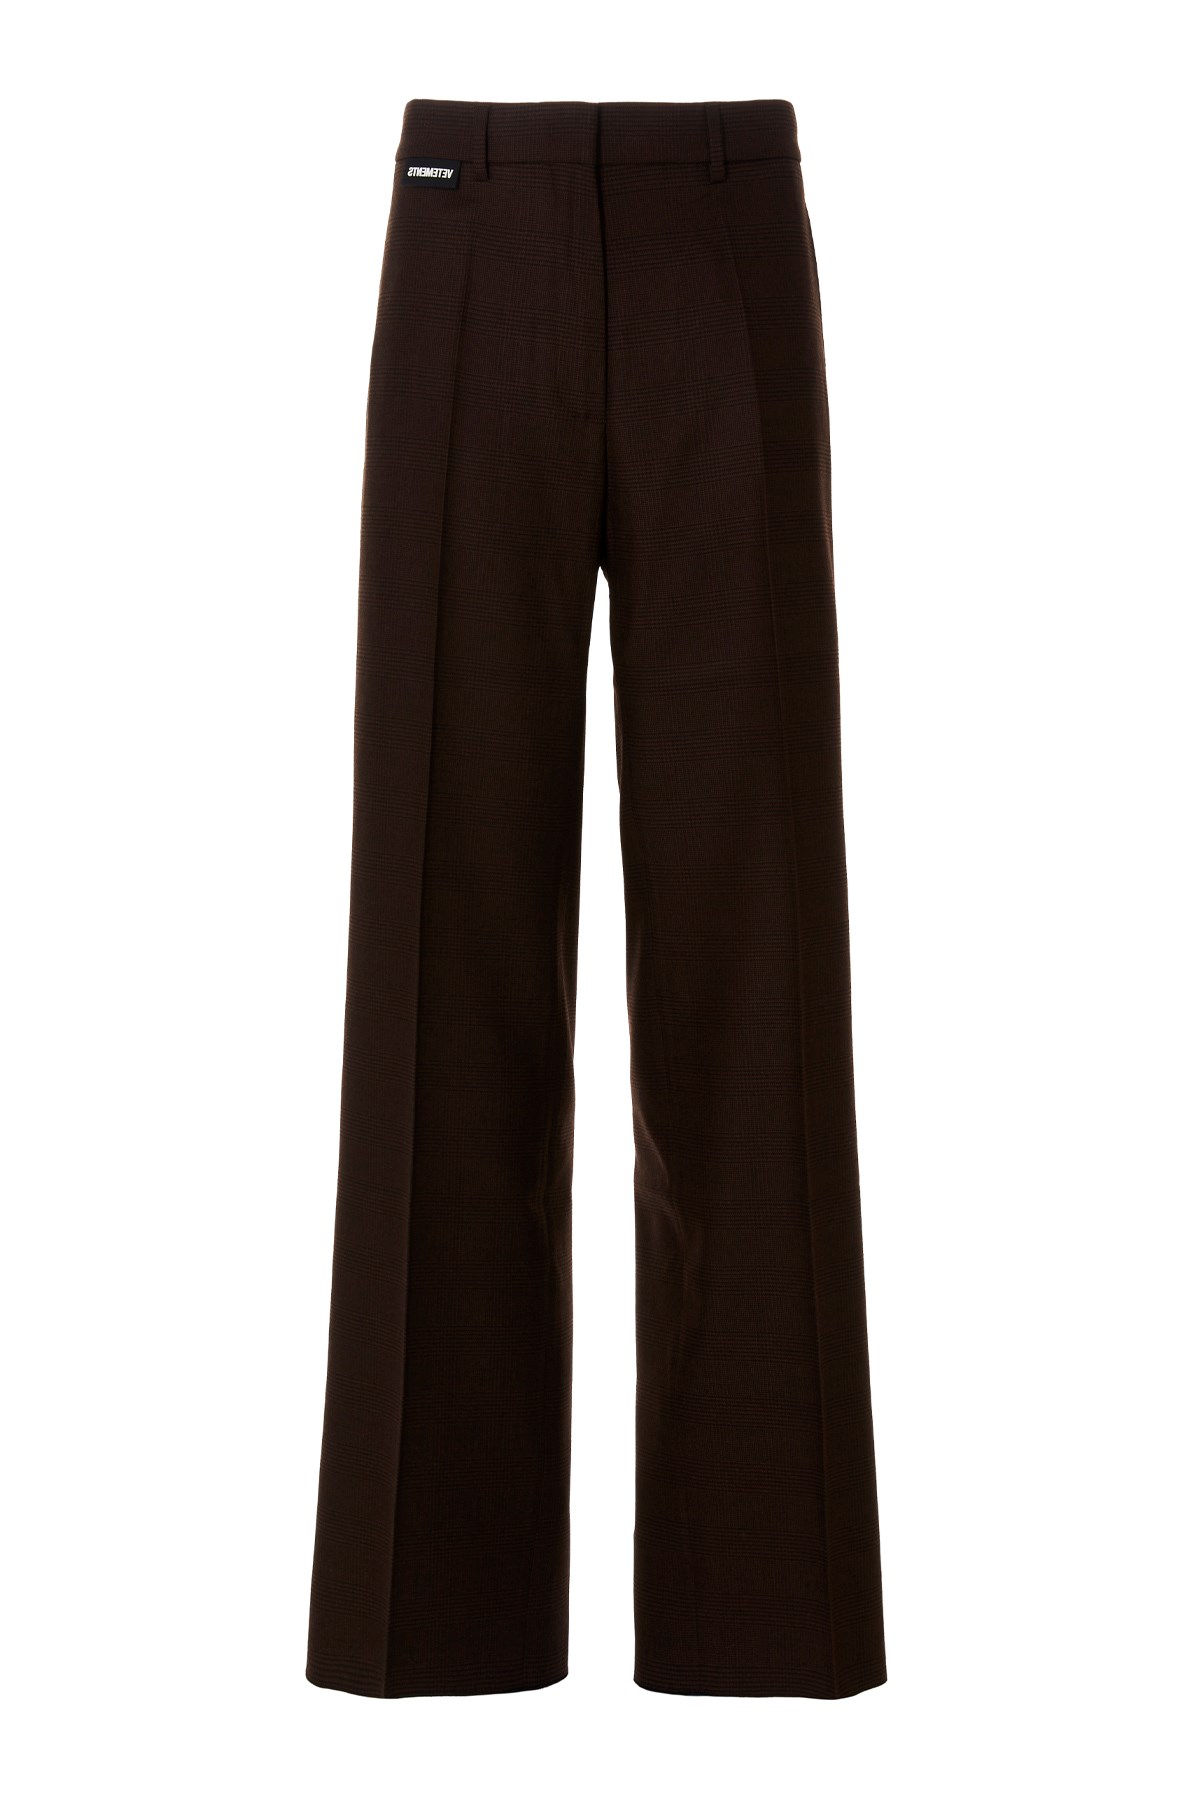 VETEMENTS Tailored Wool Trousers